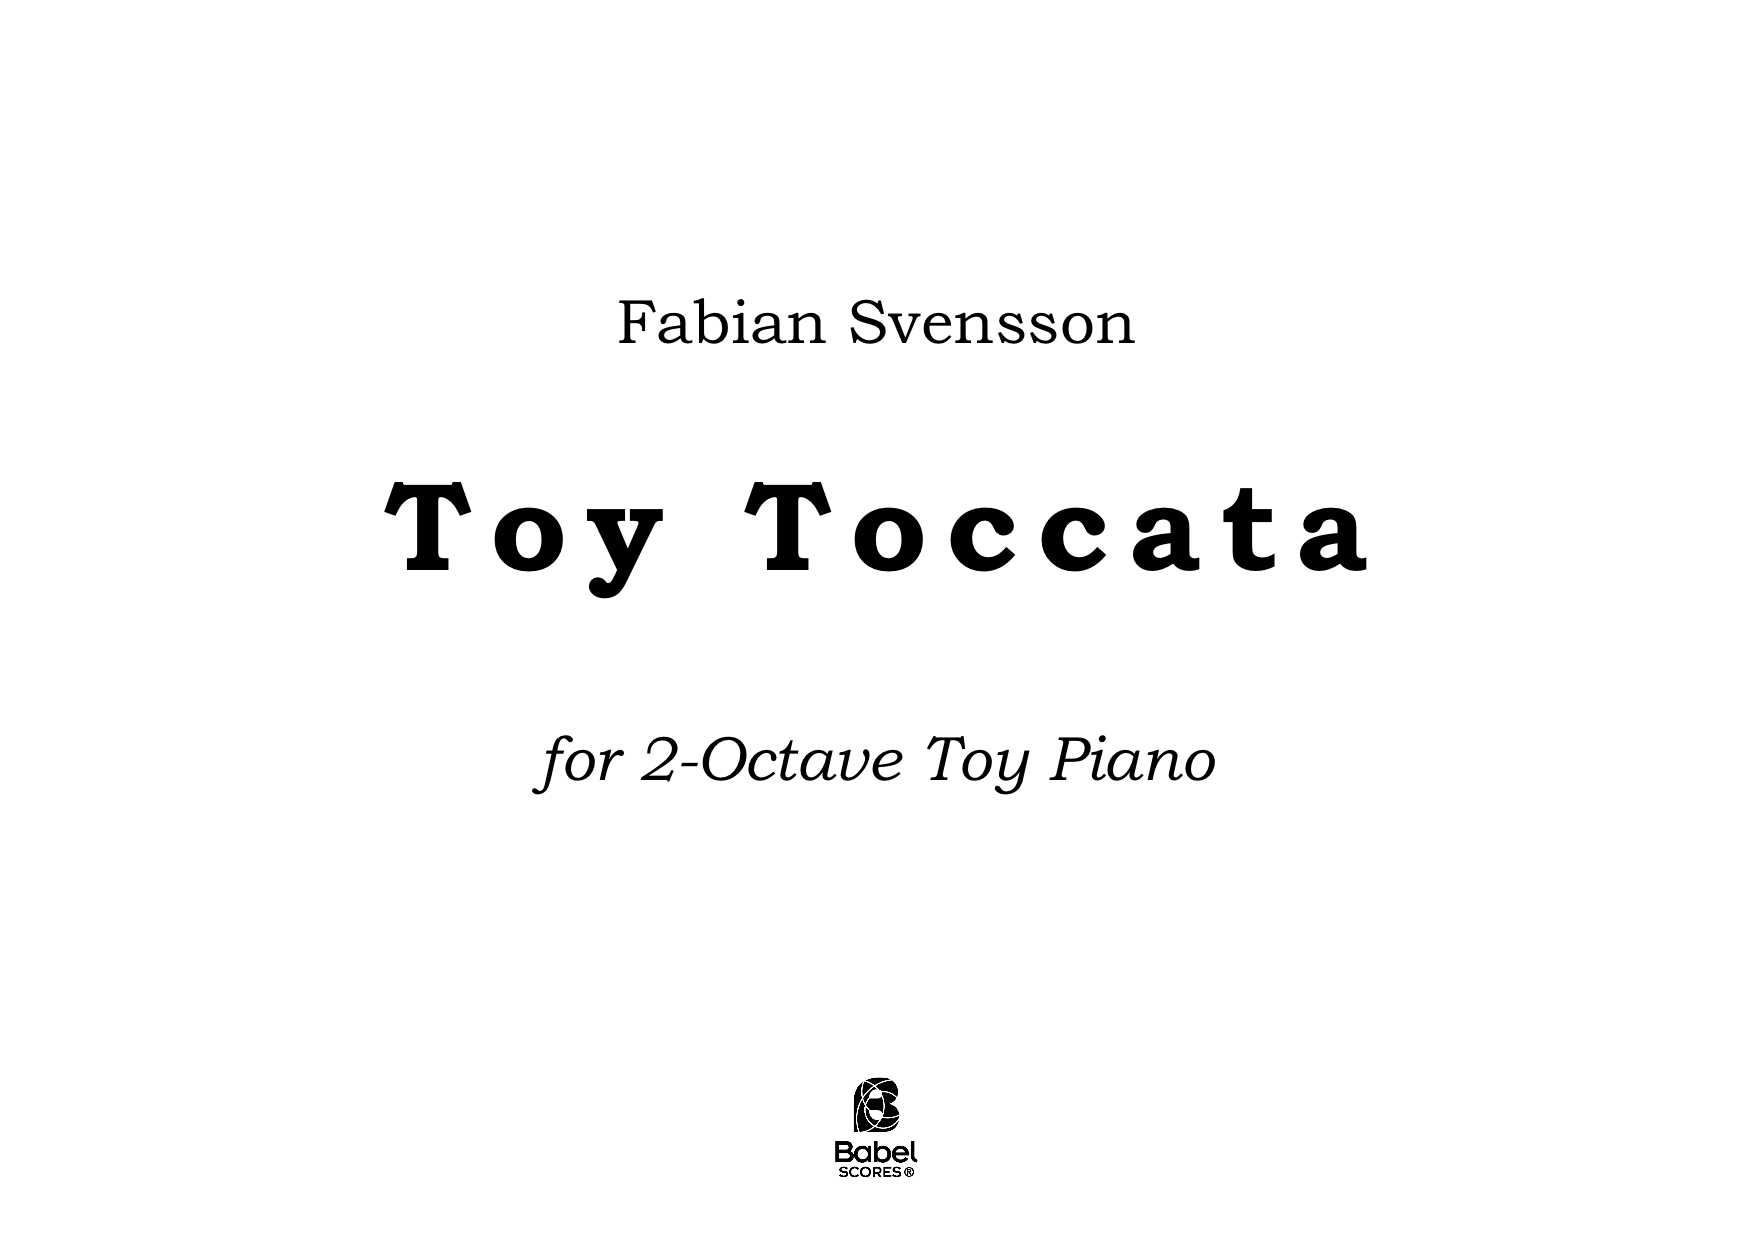 Toy Toccata A4 z 3 1 265